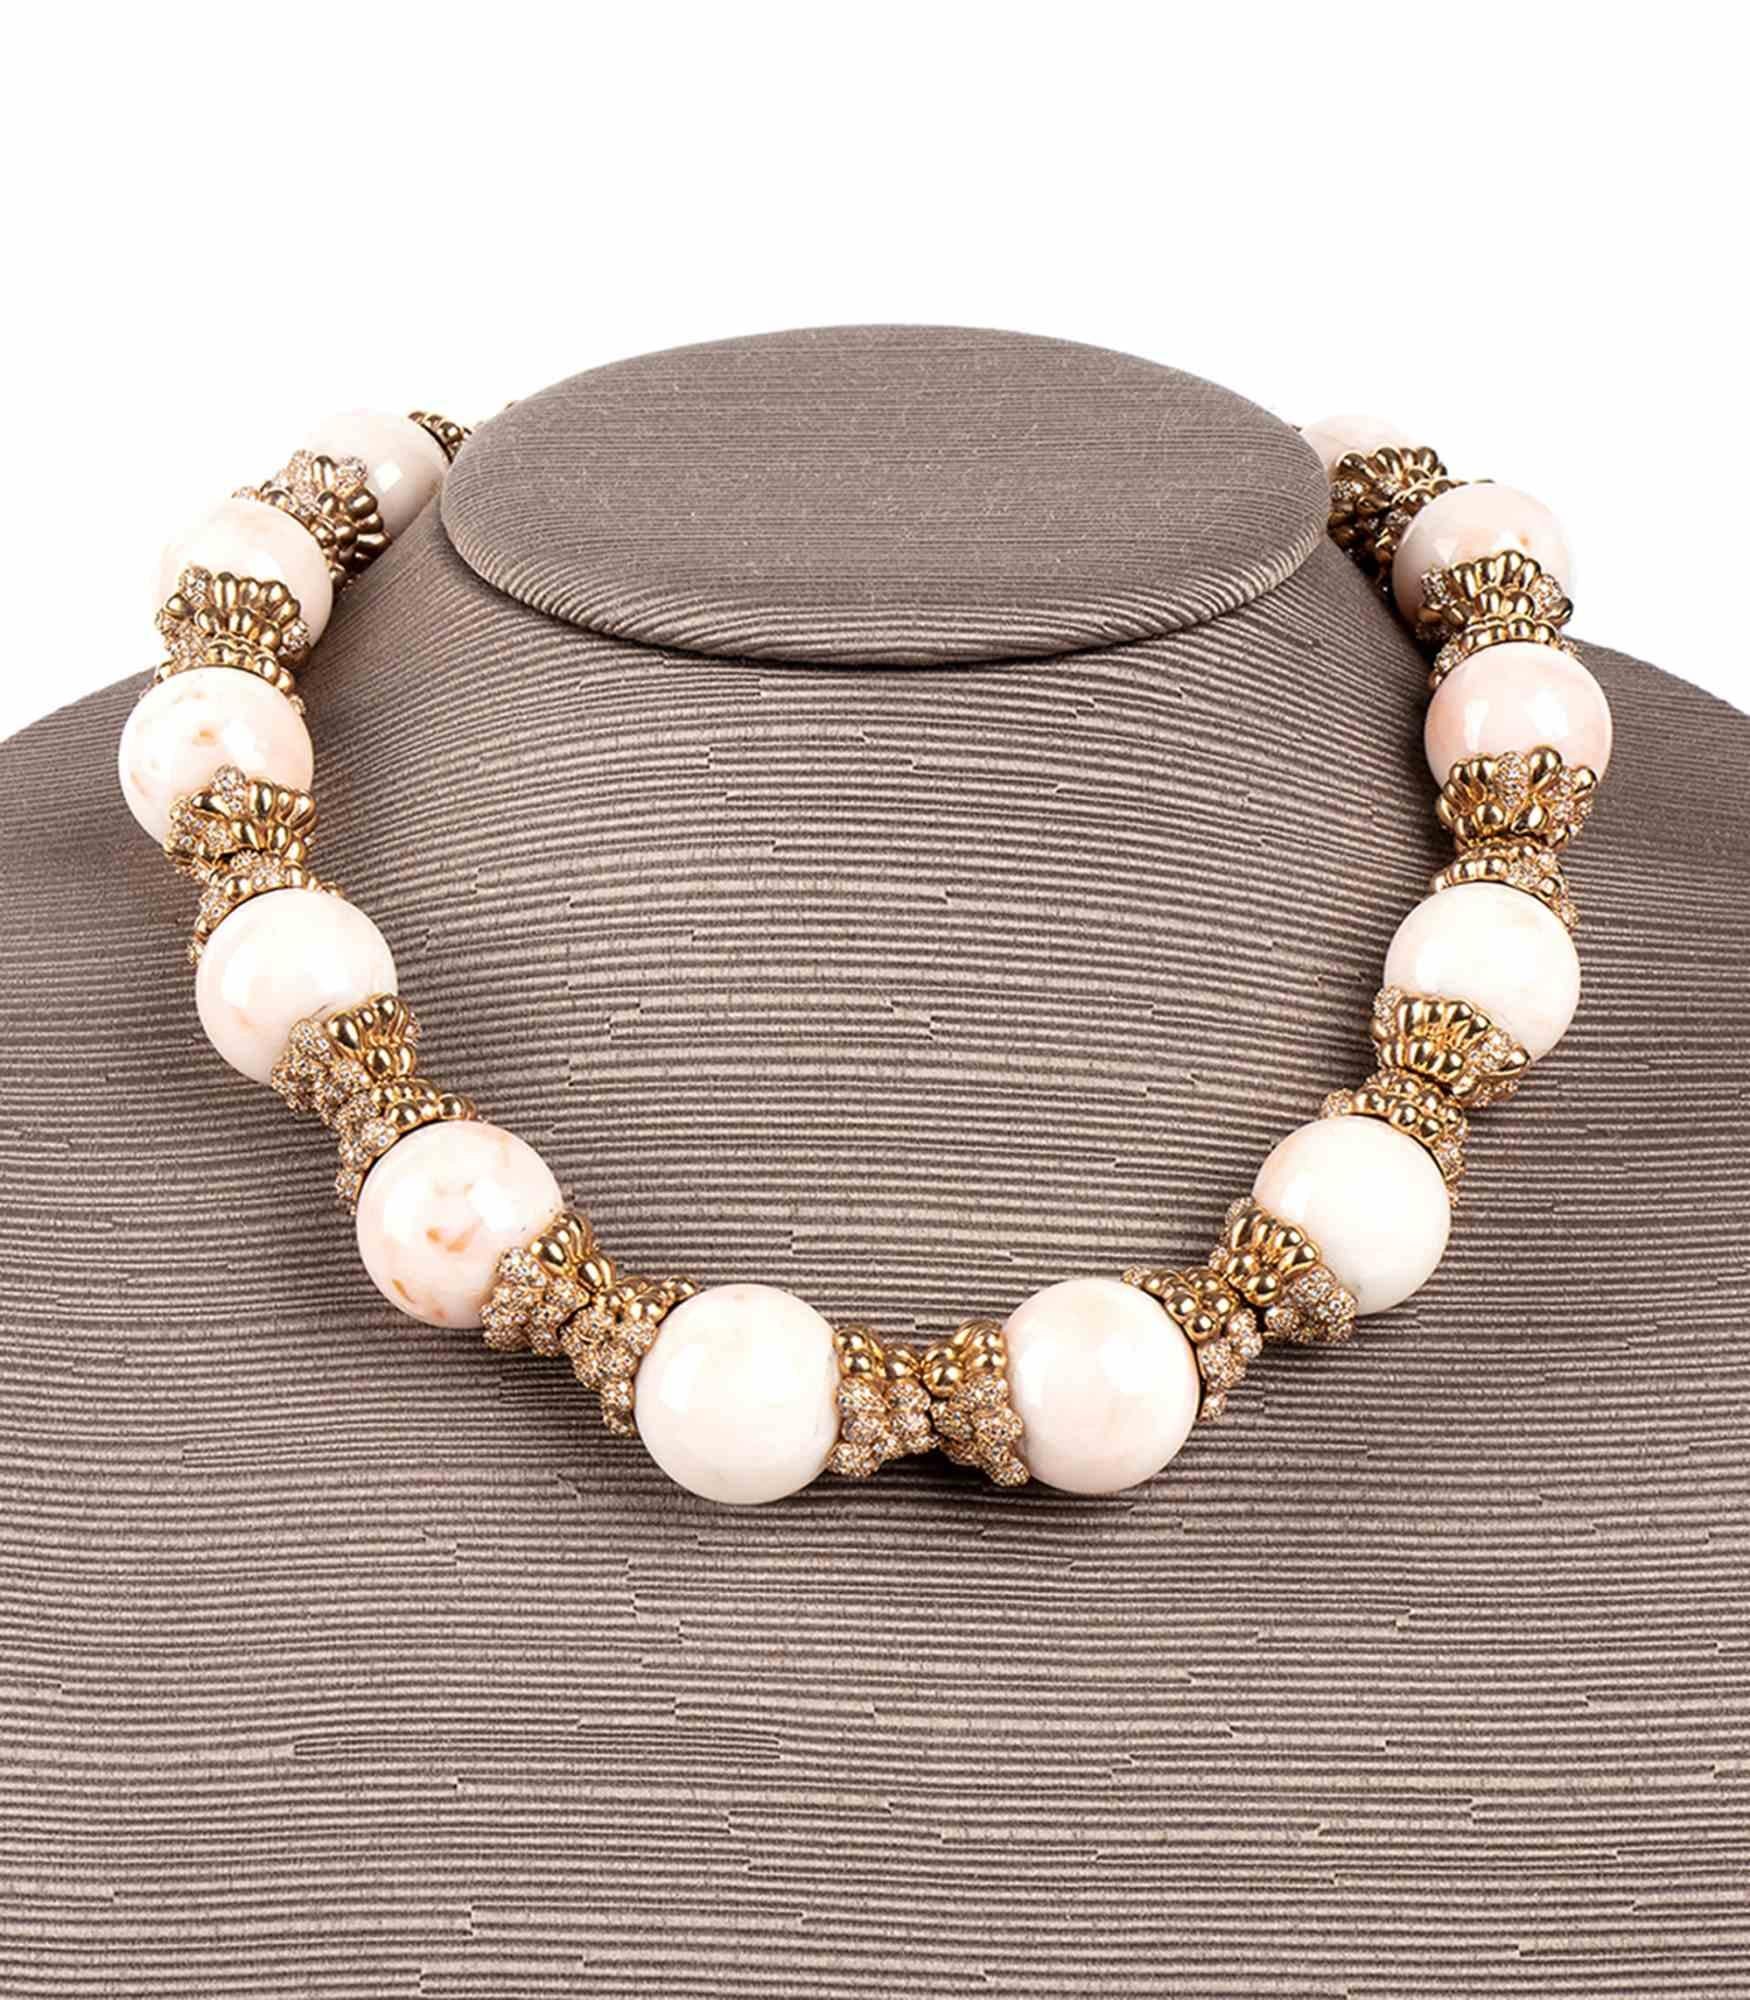 Modern Gold Diamonds and Australian Pearls Necklace